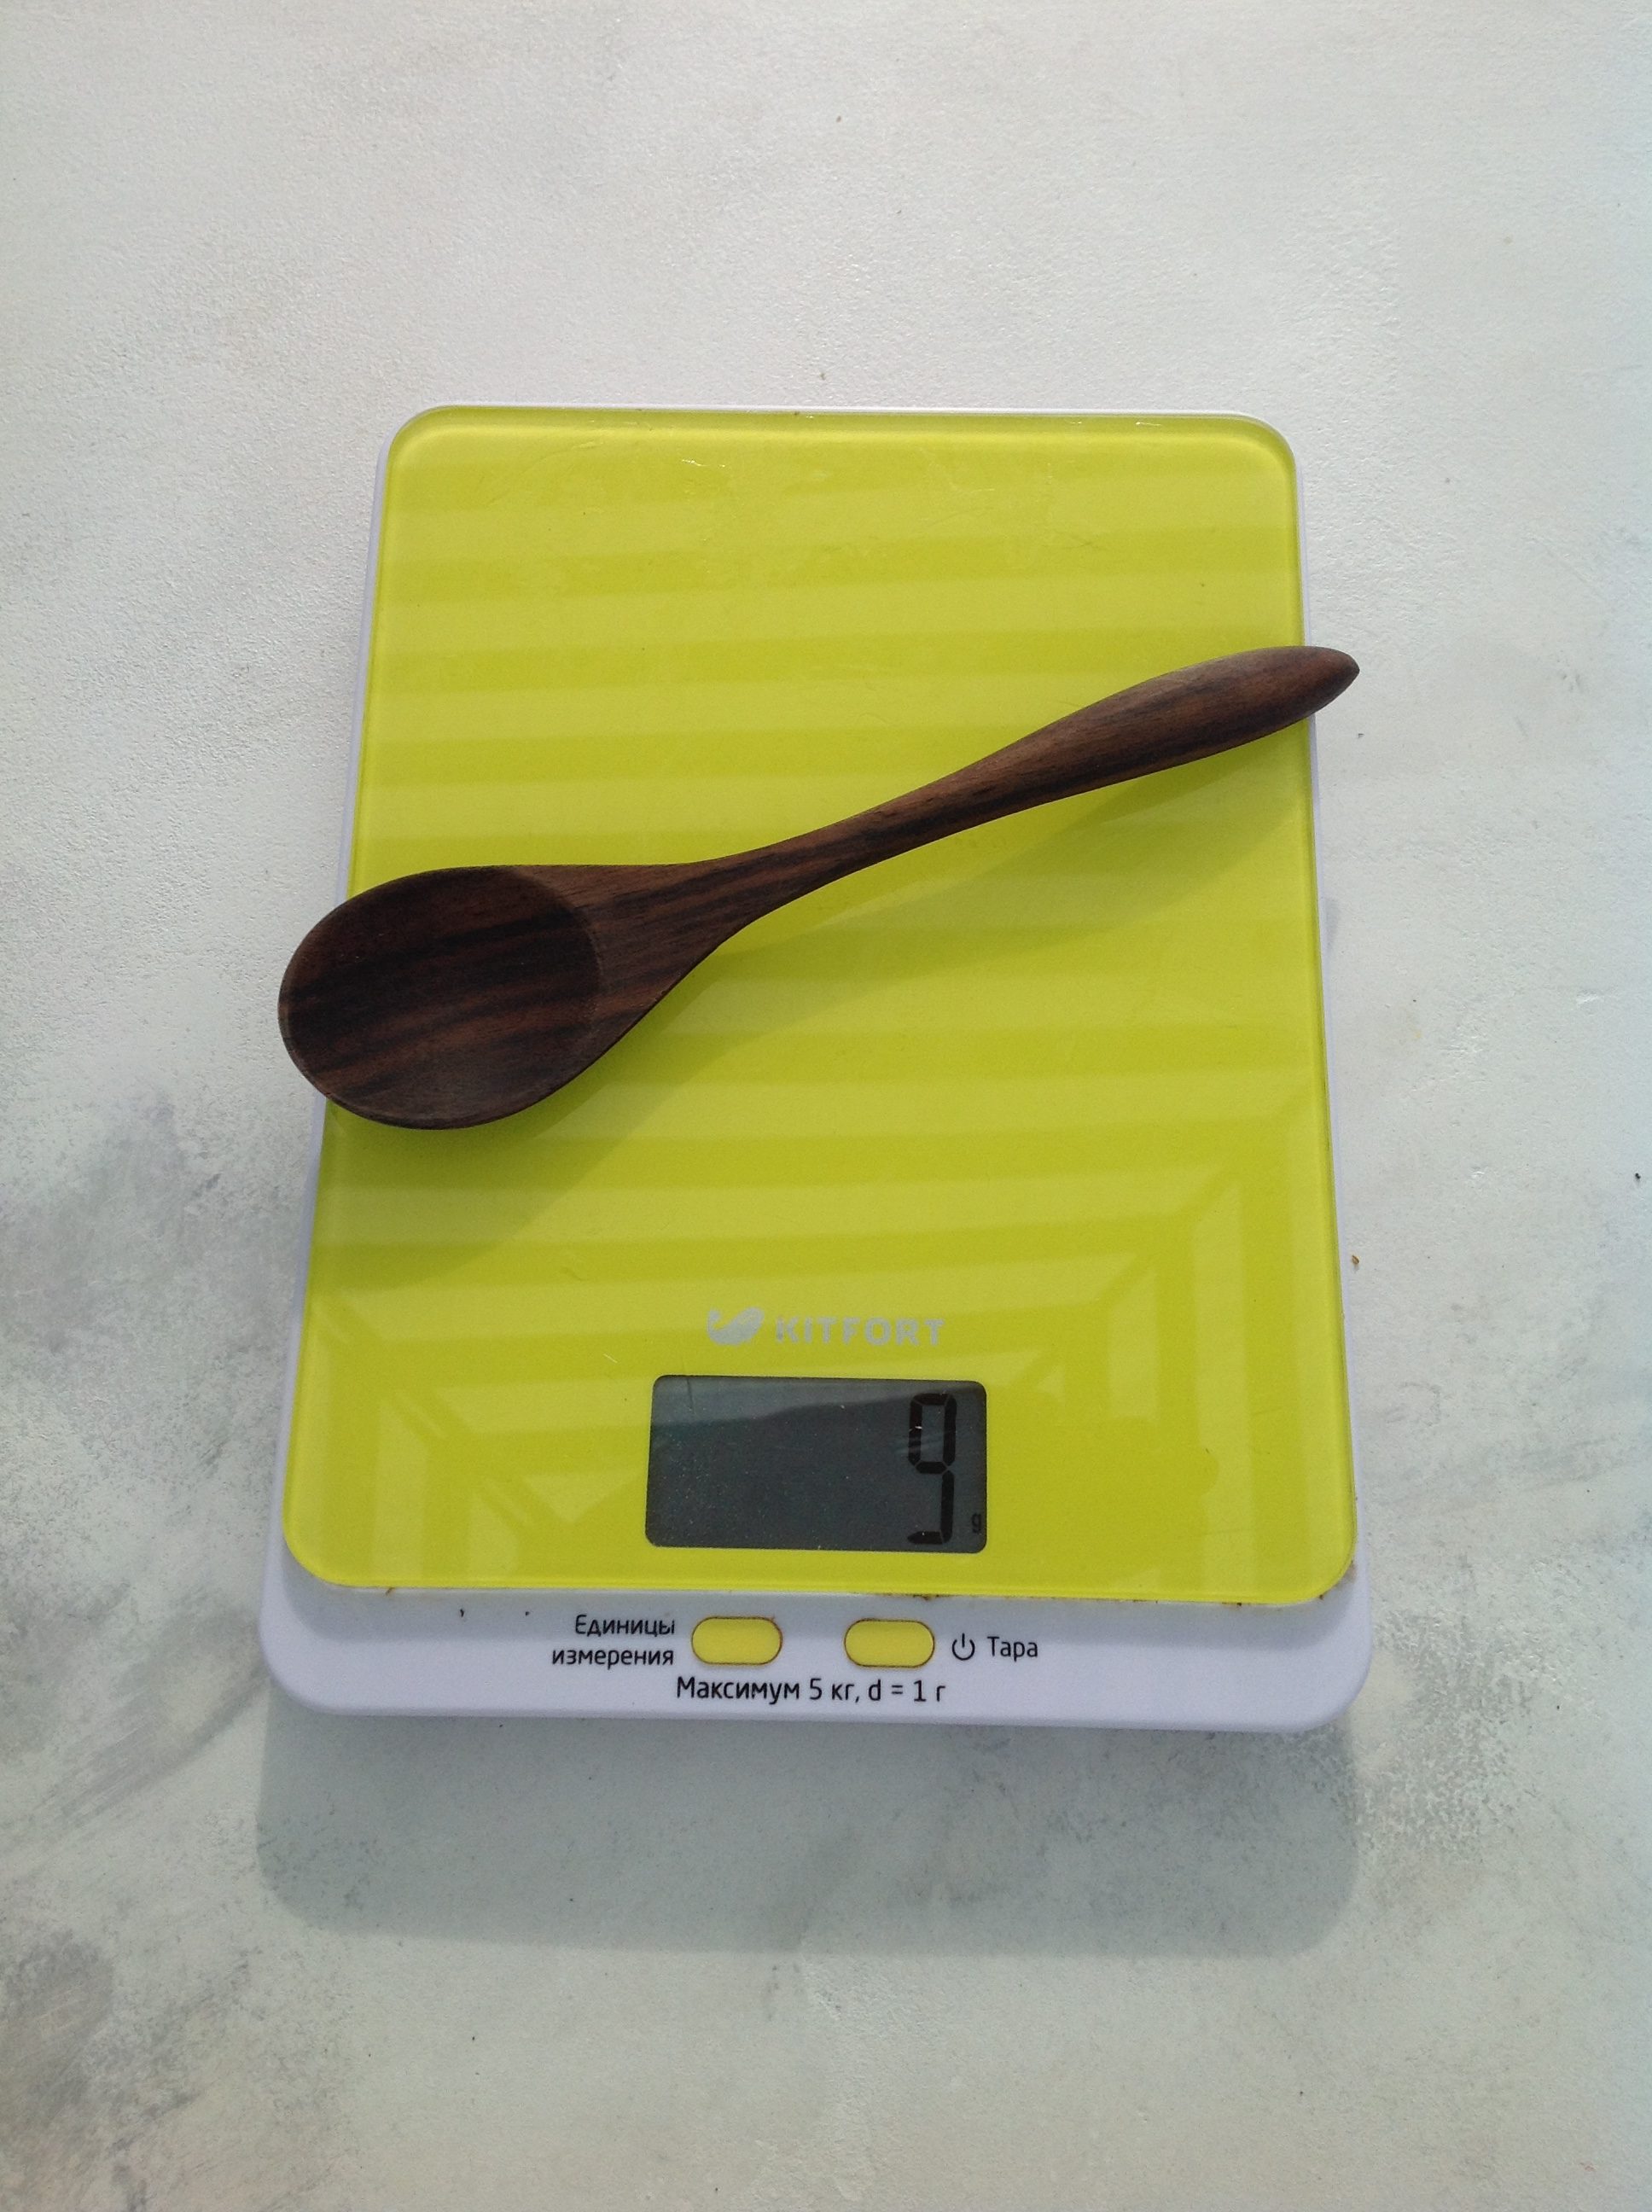 How much does a wooden spoon weigh?